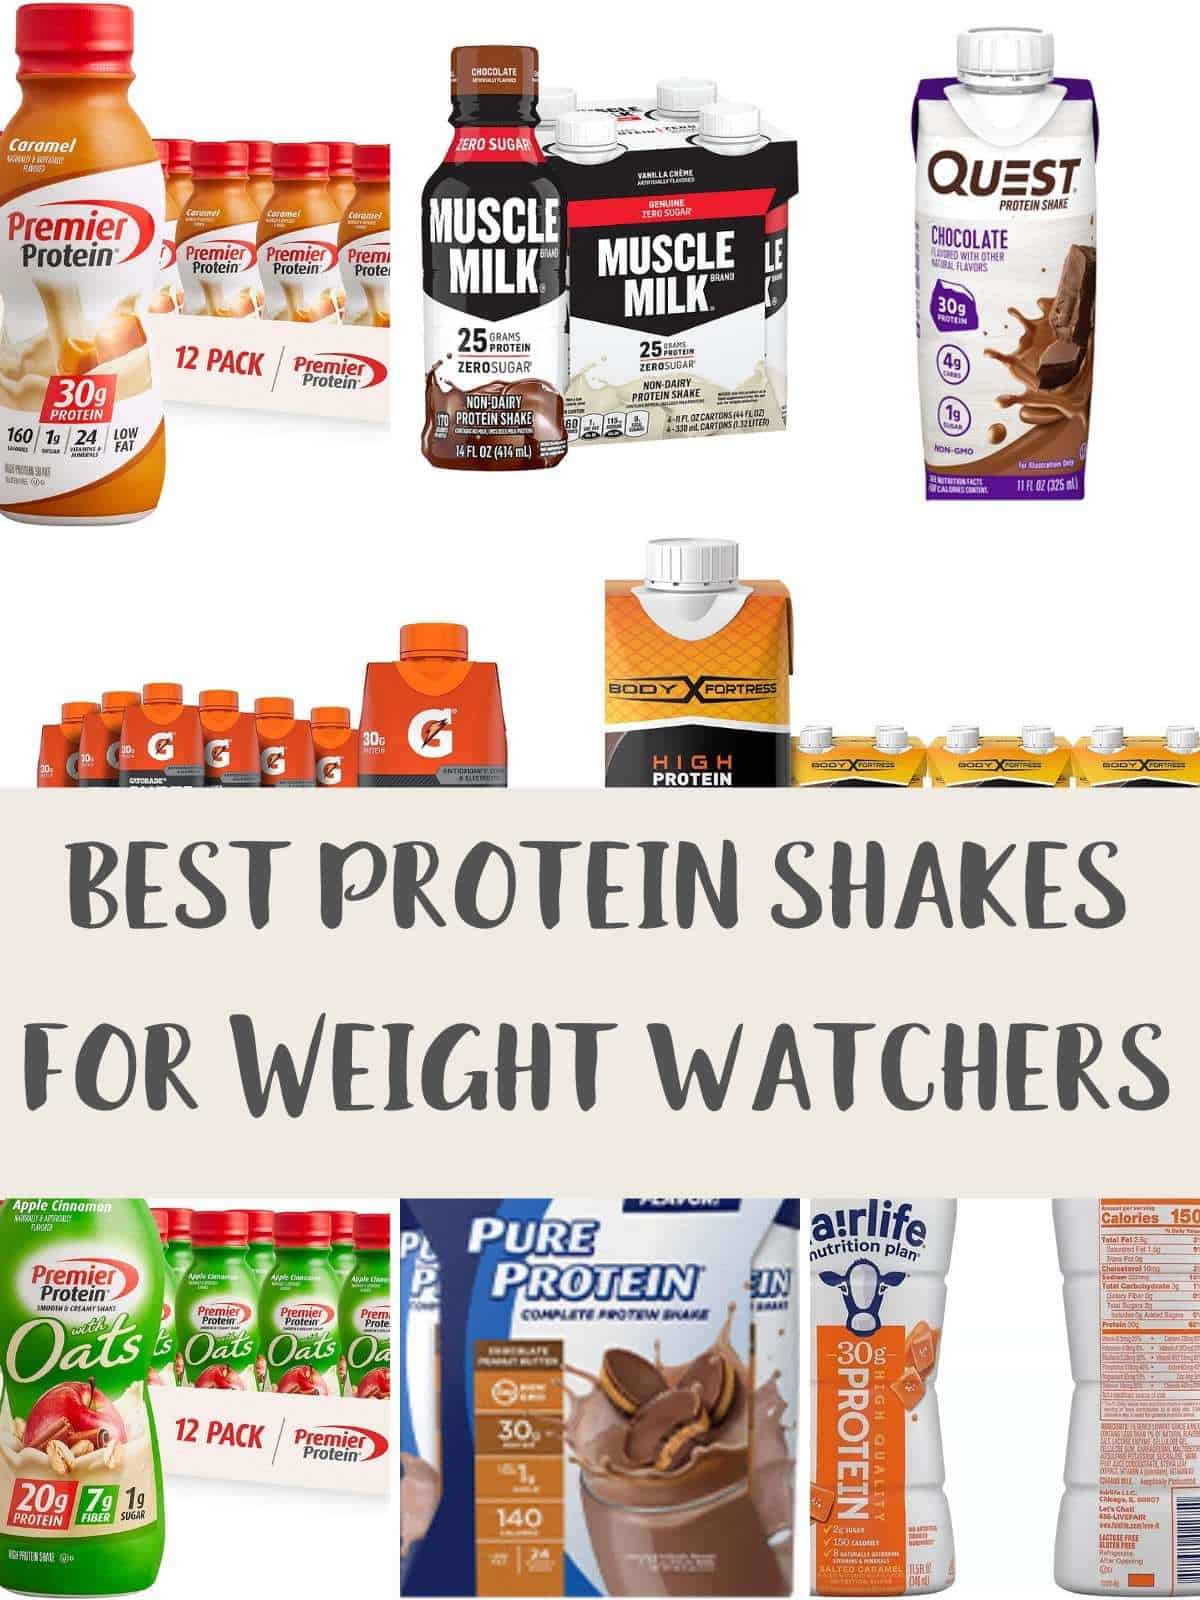 Best Protein Shakes for Weight Watchers